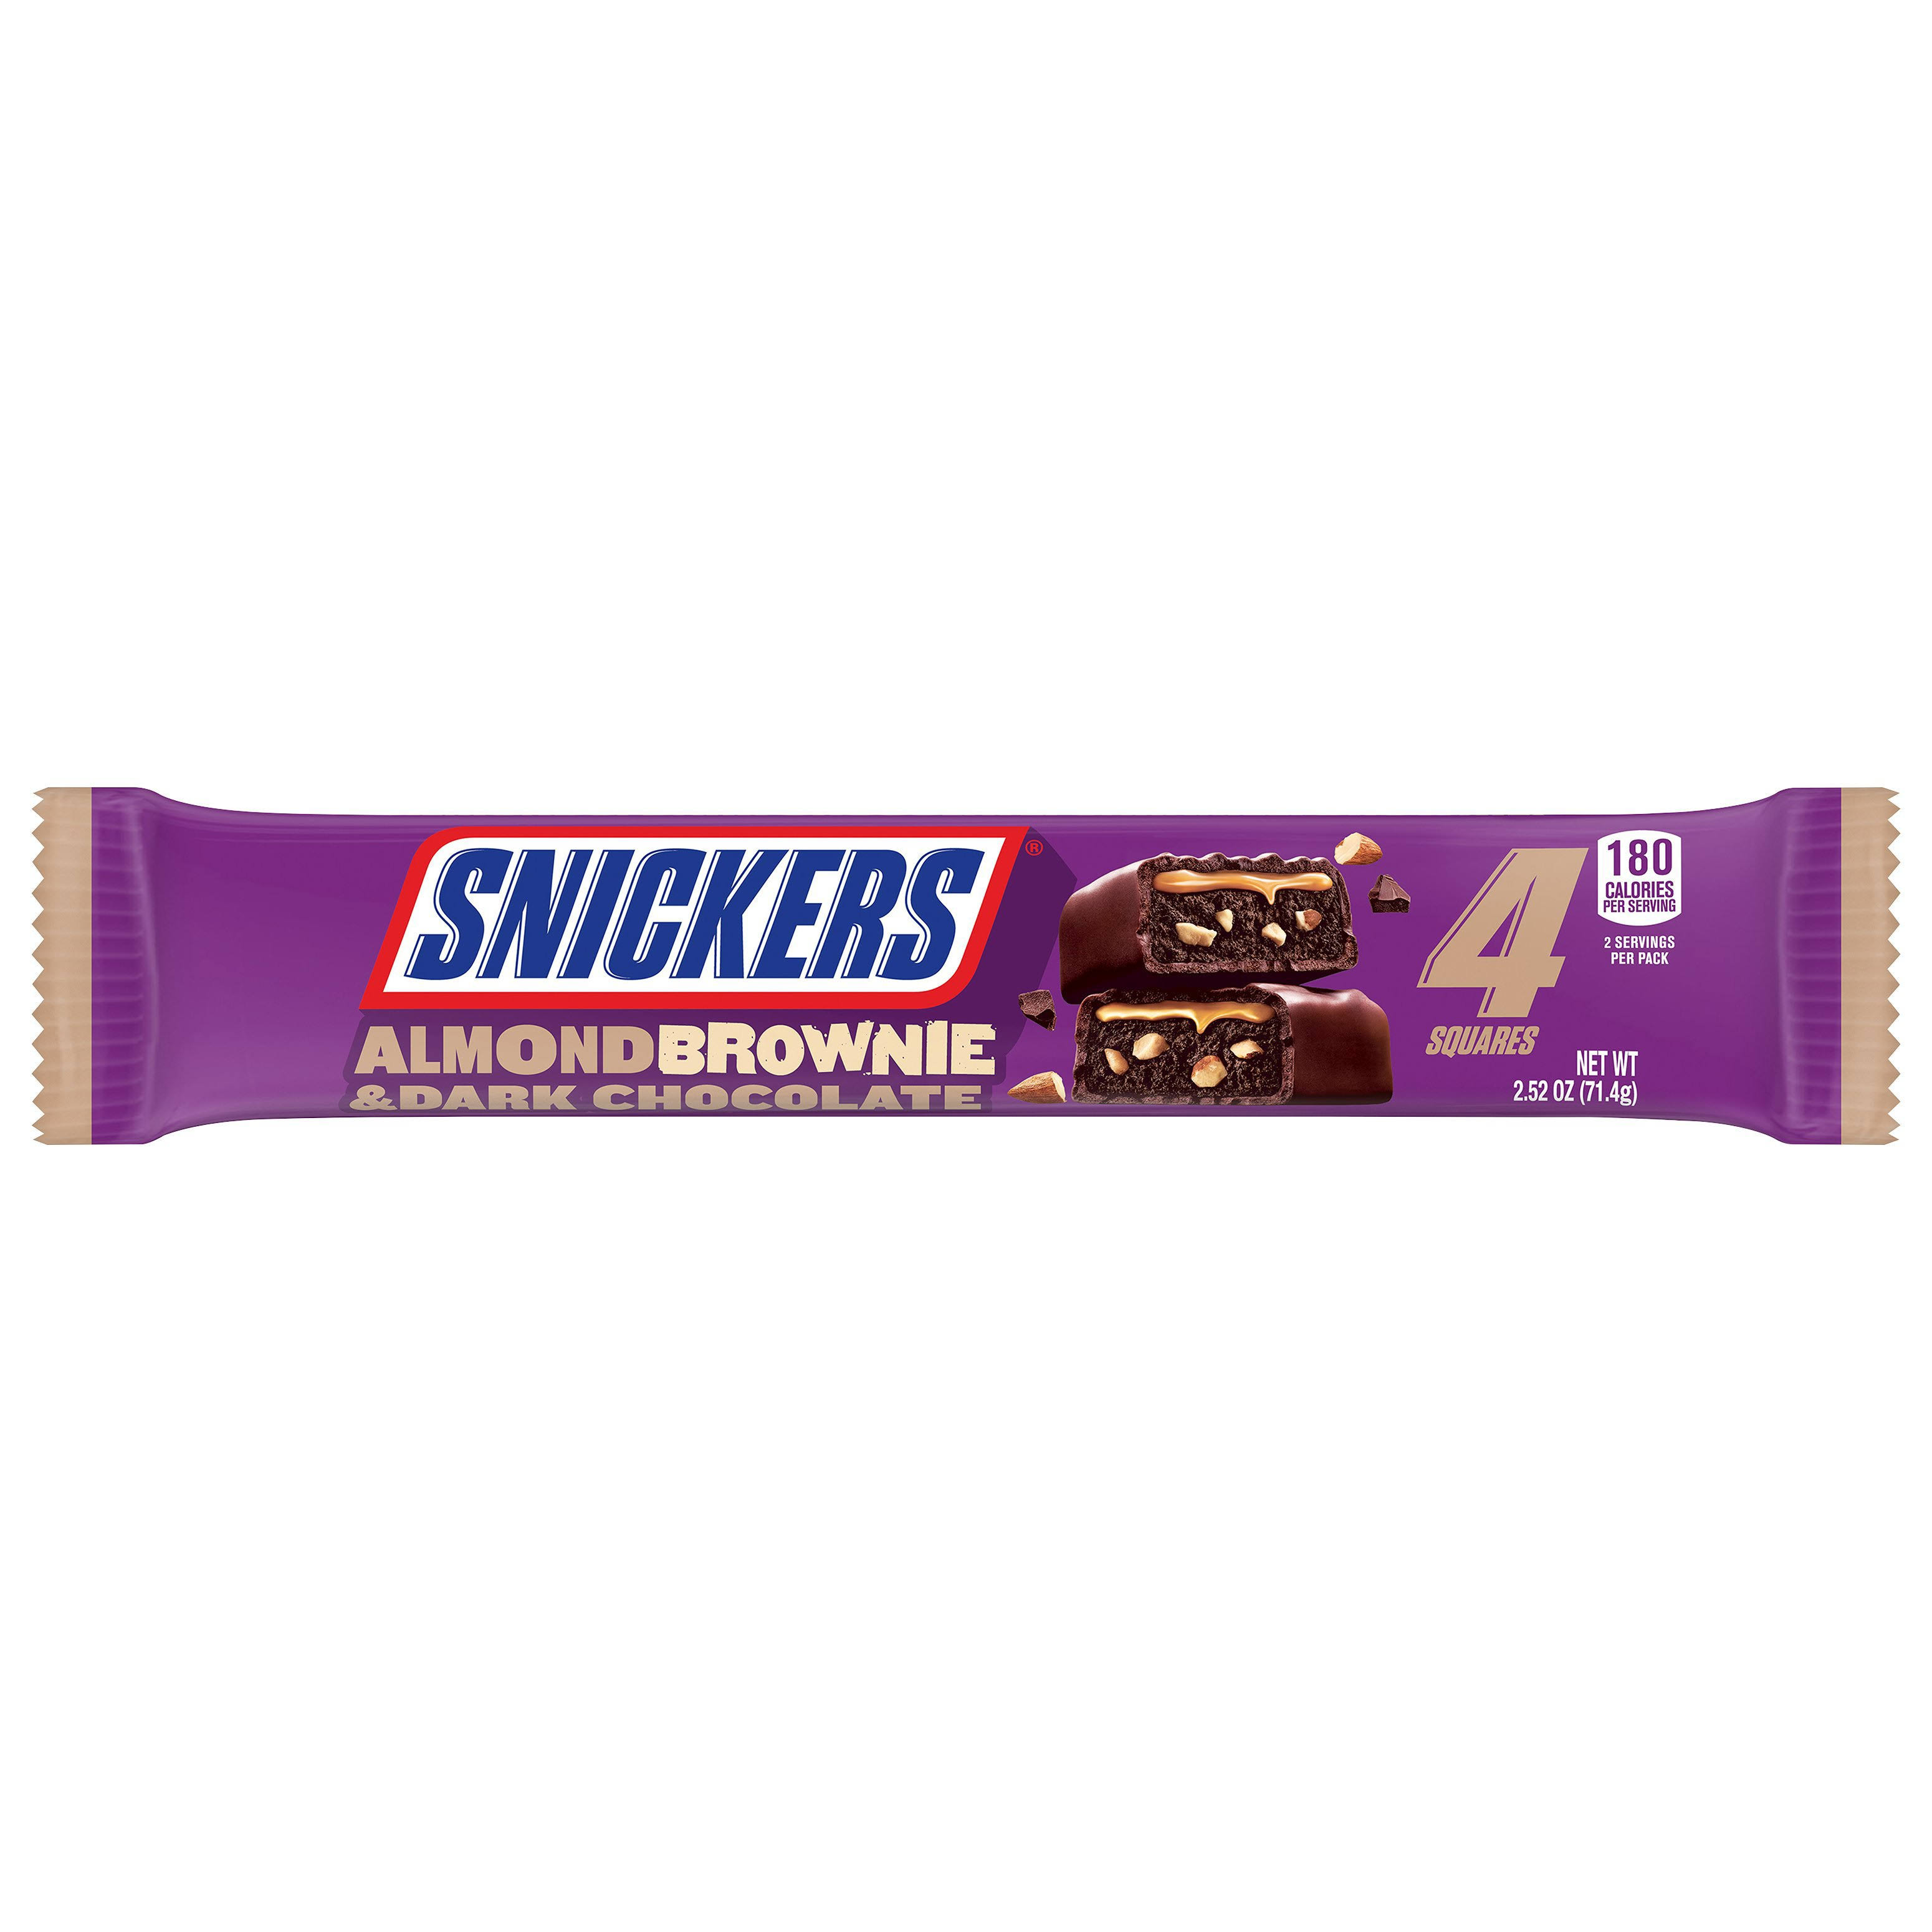 Snickers dark chocolate almond brownie candy bar pack, share size, 2.52 oz